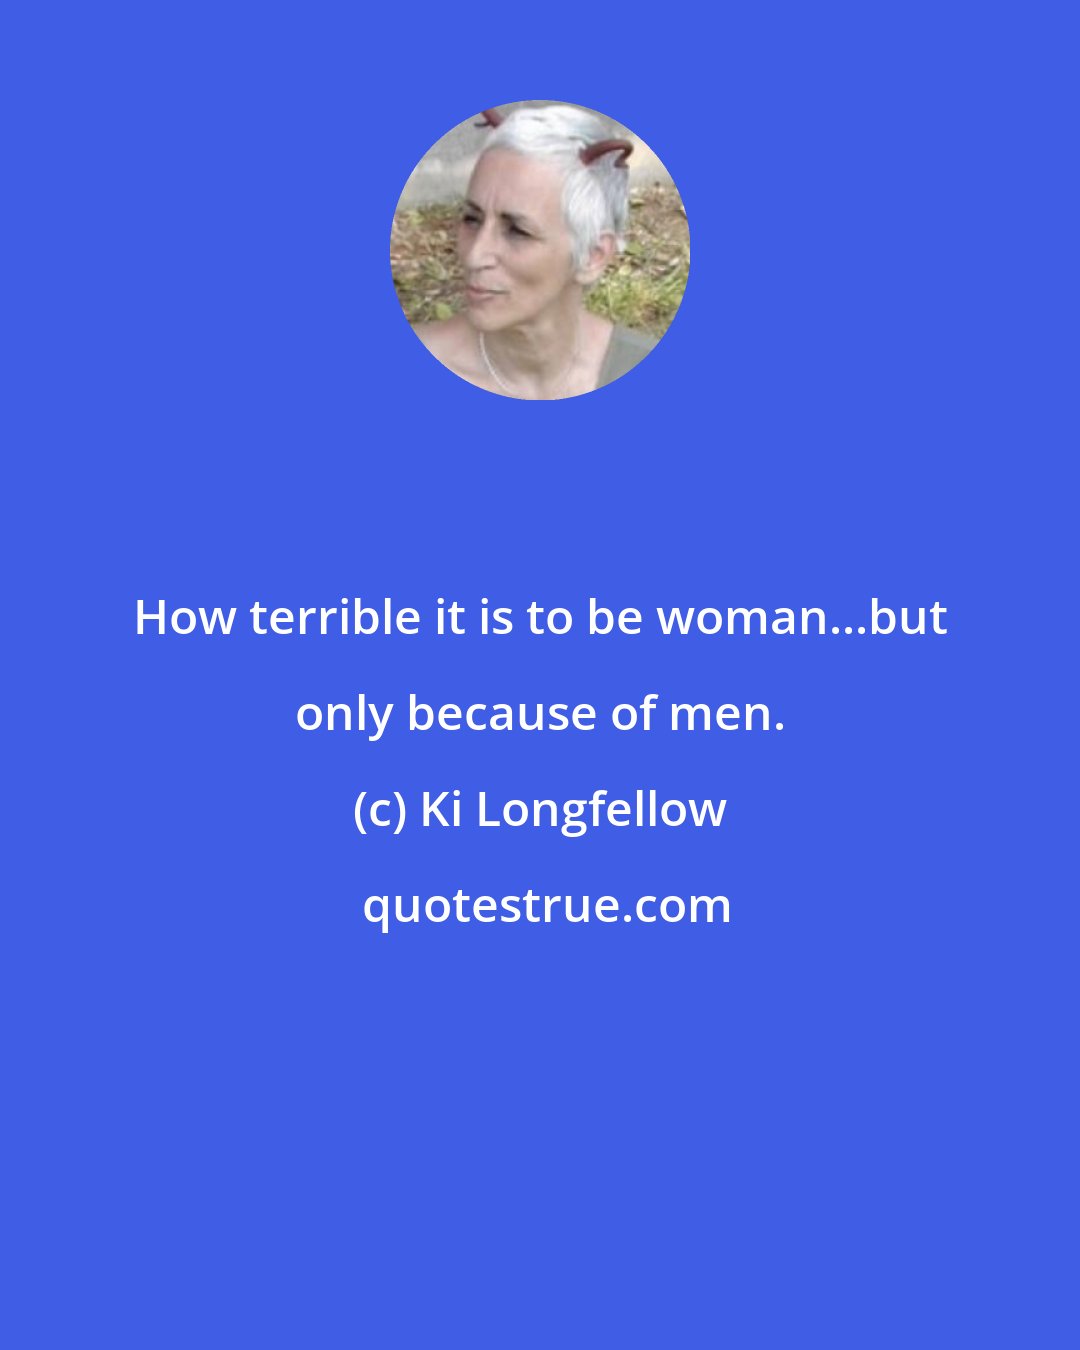 Ki Longfellow: How terrible it is to be woman...but only because of men.